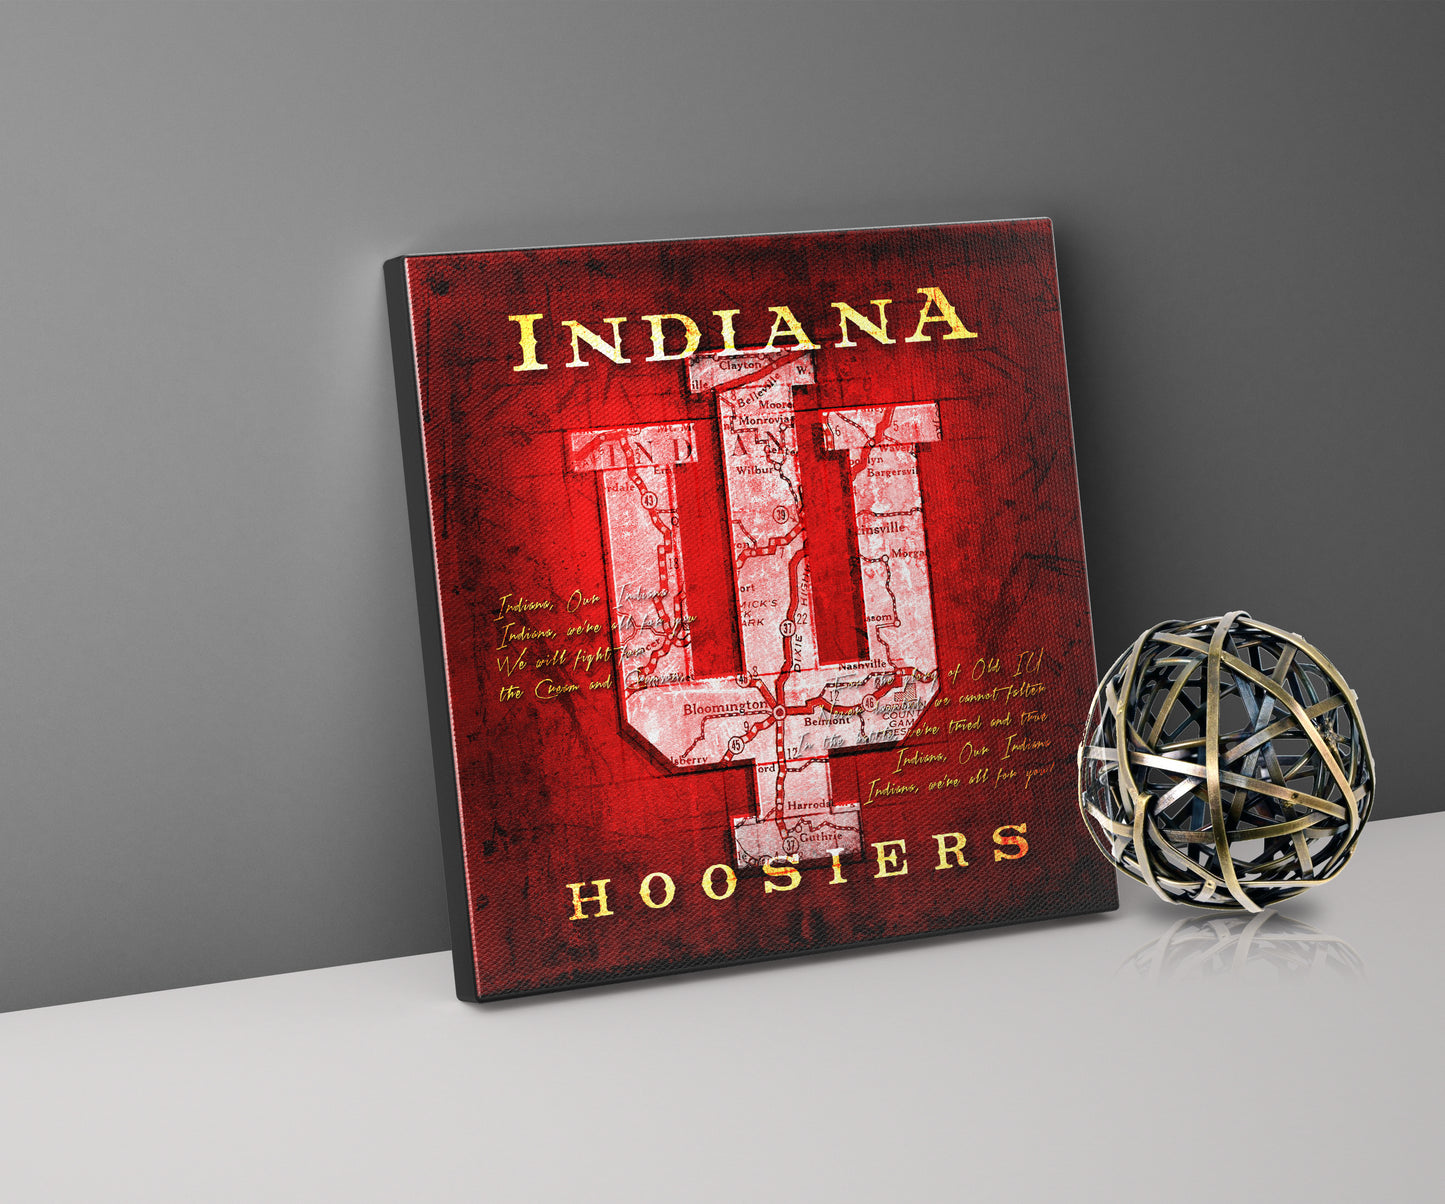 Indiana Hoosiers Vintage Canvas Map | Fight Song Lyrics